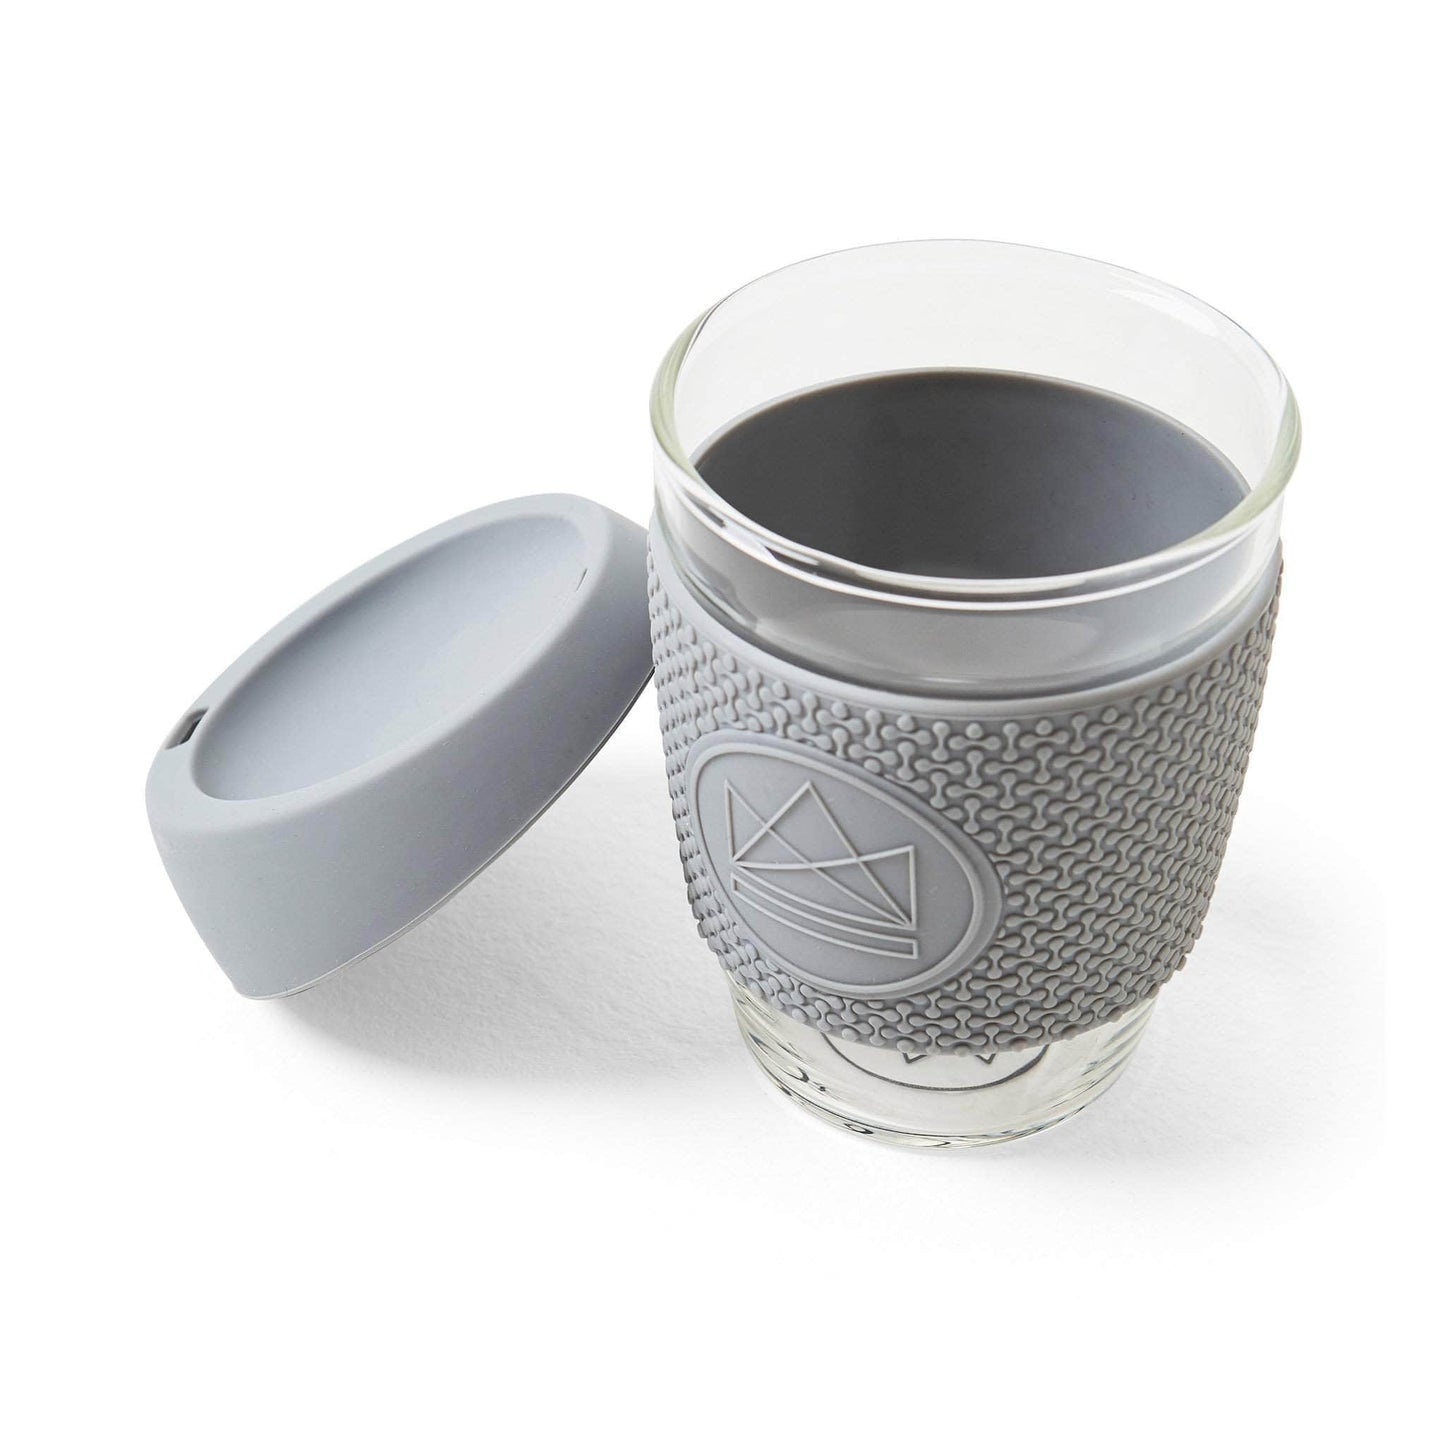 Neon Kactus Coffee Cup Neon Kactus - Glass Coffee Cups -  12oz - Forever Young Grey